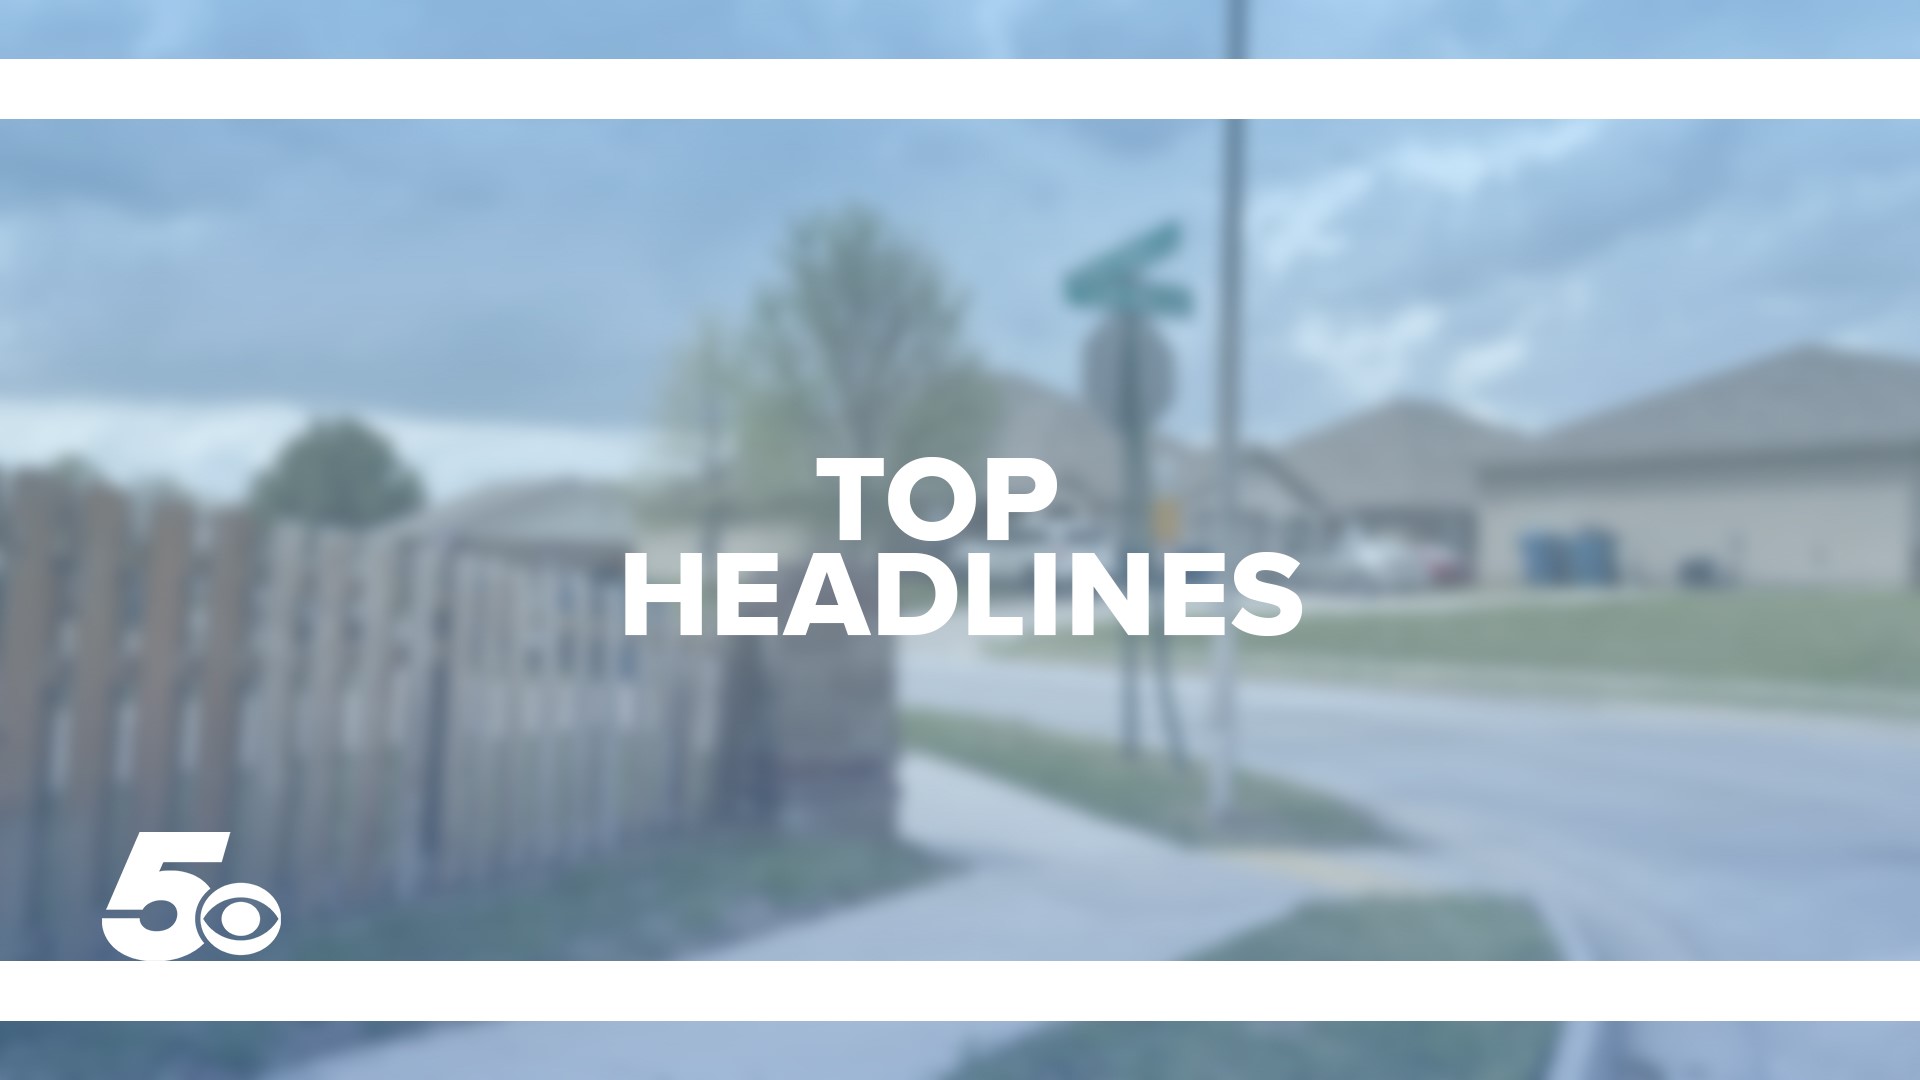 Check out some of today's top headlines for local news across Northwest Arkansas and the River Valley.